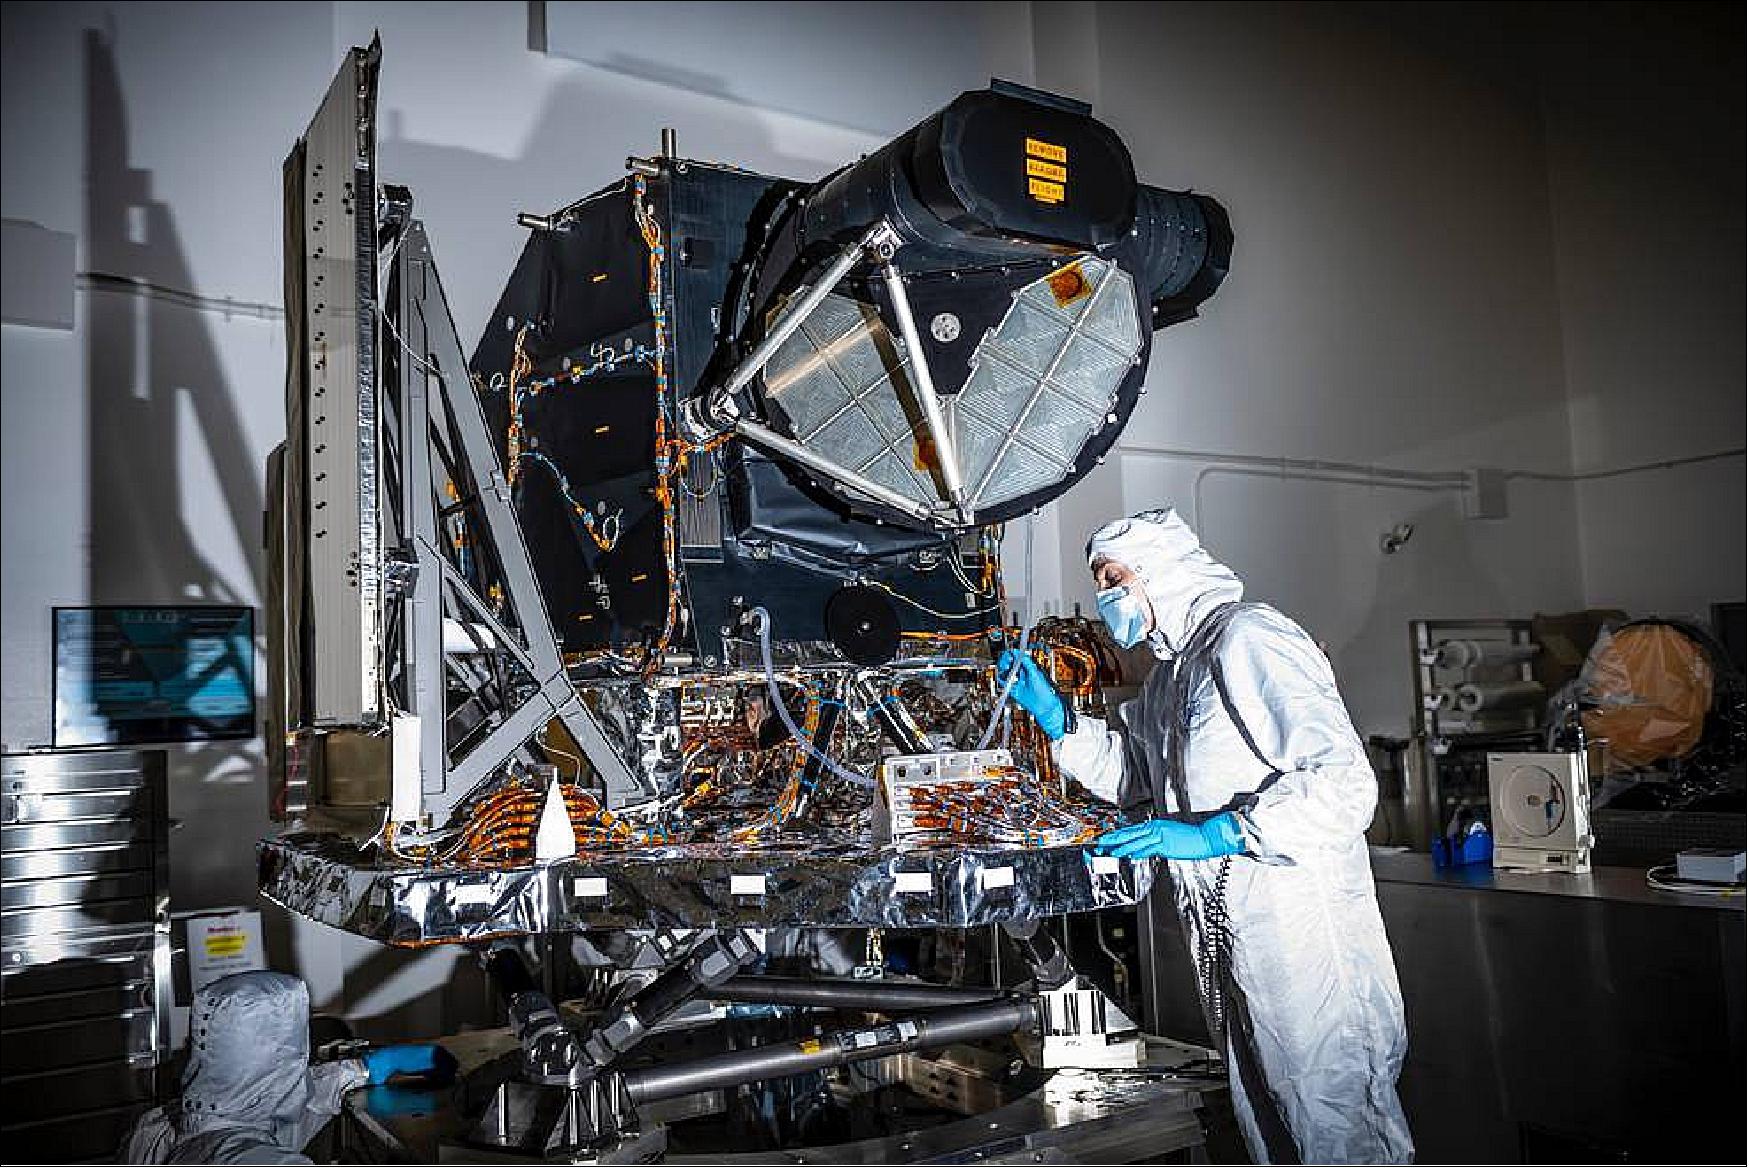 Figure 6: OLI-2 is shown in this photo at Ball Aerospace in Boulder, Colorado, where it was built and tested. On Sept. 18 it was trucked from Boulder to the Northrop Grumman facility in Gilbert, Arizona, arriving the next day. At Northrop Grumman, engineers will assemble and then test the complete Landsat 9 spacecraft with OLI-2 and another instrument, TIRS-2 (Thermal Infrared Sensor-2), which was built at NASA’s Goddard Space Flight Center in Greenbelt, Maryland (image credit: Ball Aerospace, Alex Turner)